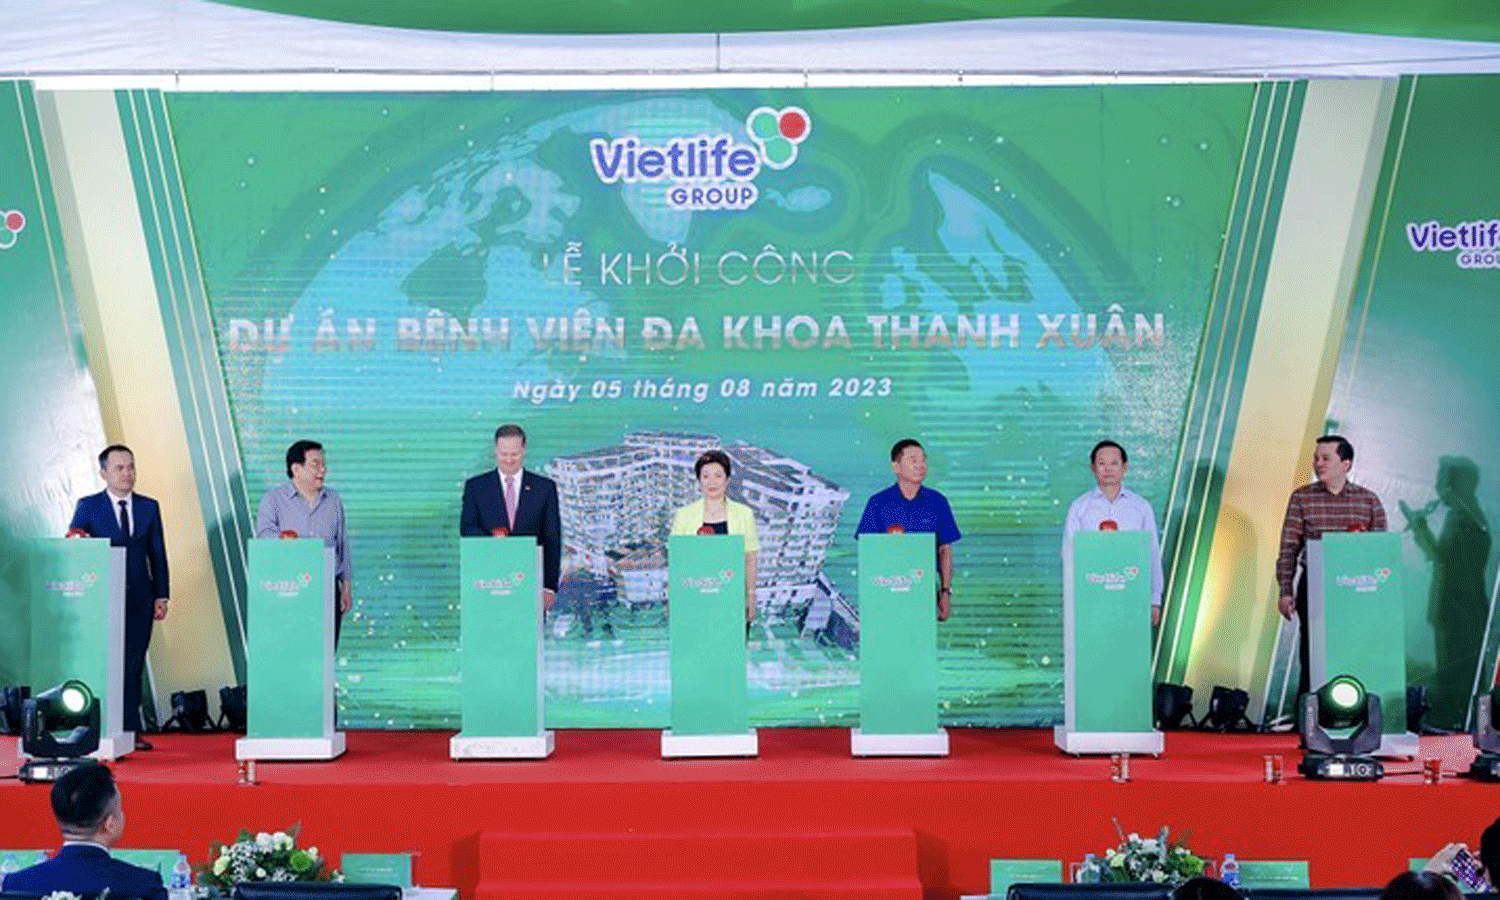 ABO/NDO- Vietlife Group commenced the construction of Vietlife International Hospital – a 5-star convalescent hospital of world standards – in Hanoi on the morning of August 5.